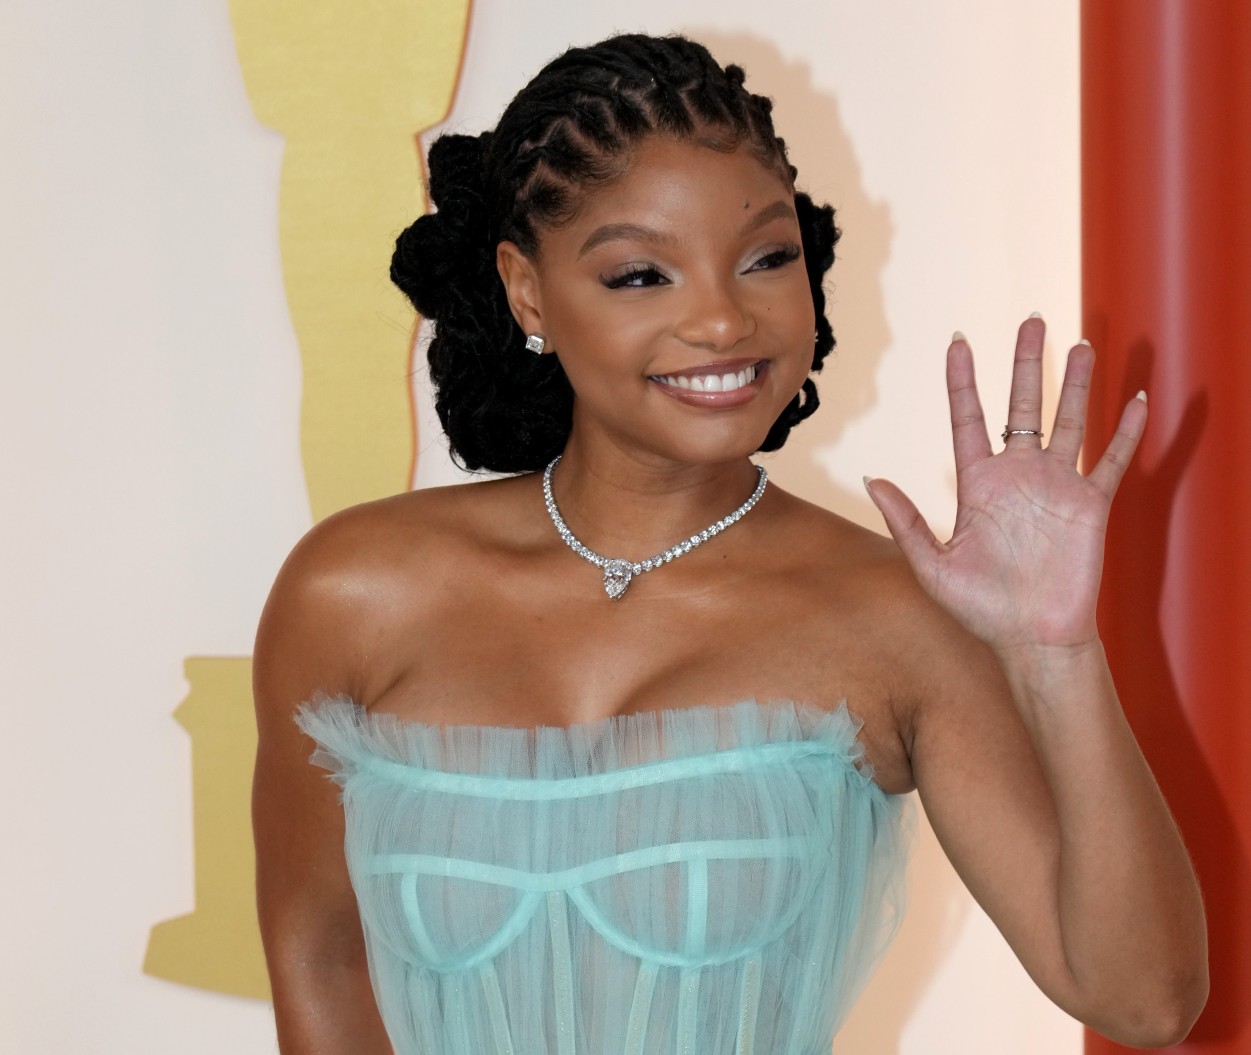 Halle Bailey’s Emotional Moment With Young “The Little Mermaid” Fan Has The Internet In Tears